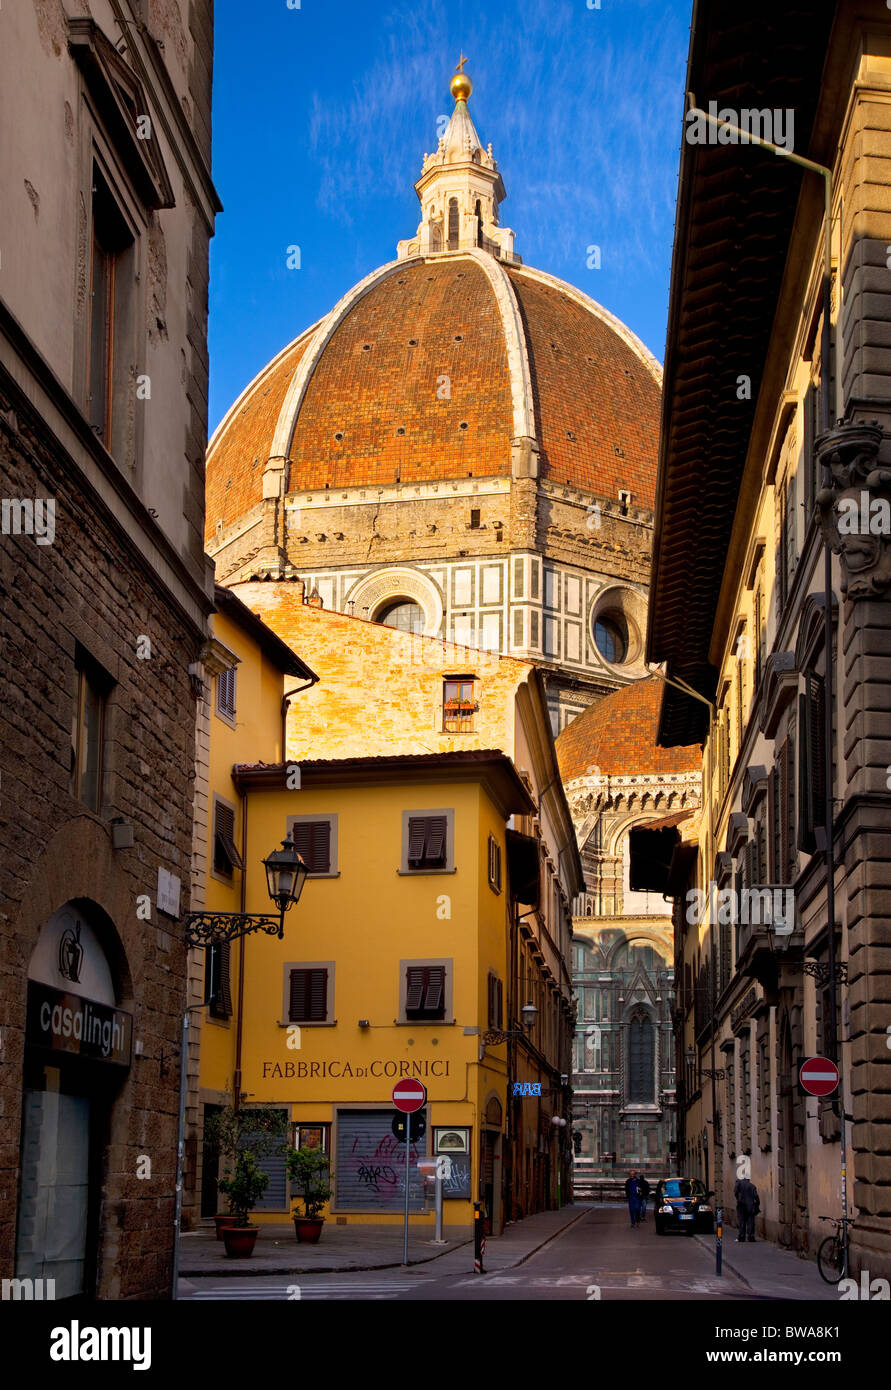 View down a street of the Duomo - Santa Maria del Fiore, in Florence Tuscany Italy Stock Photo